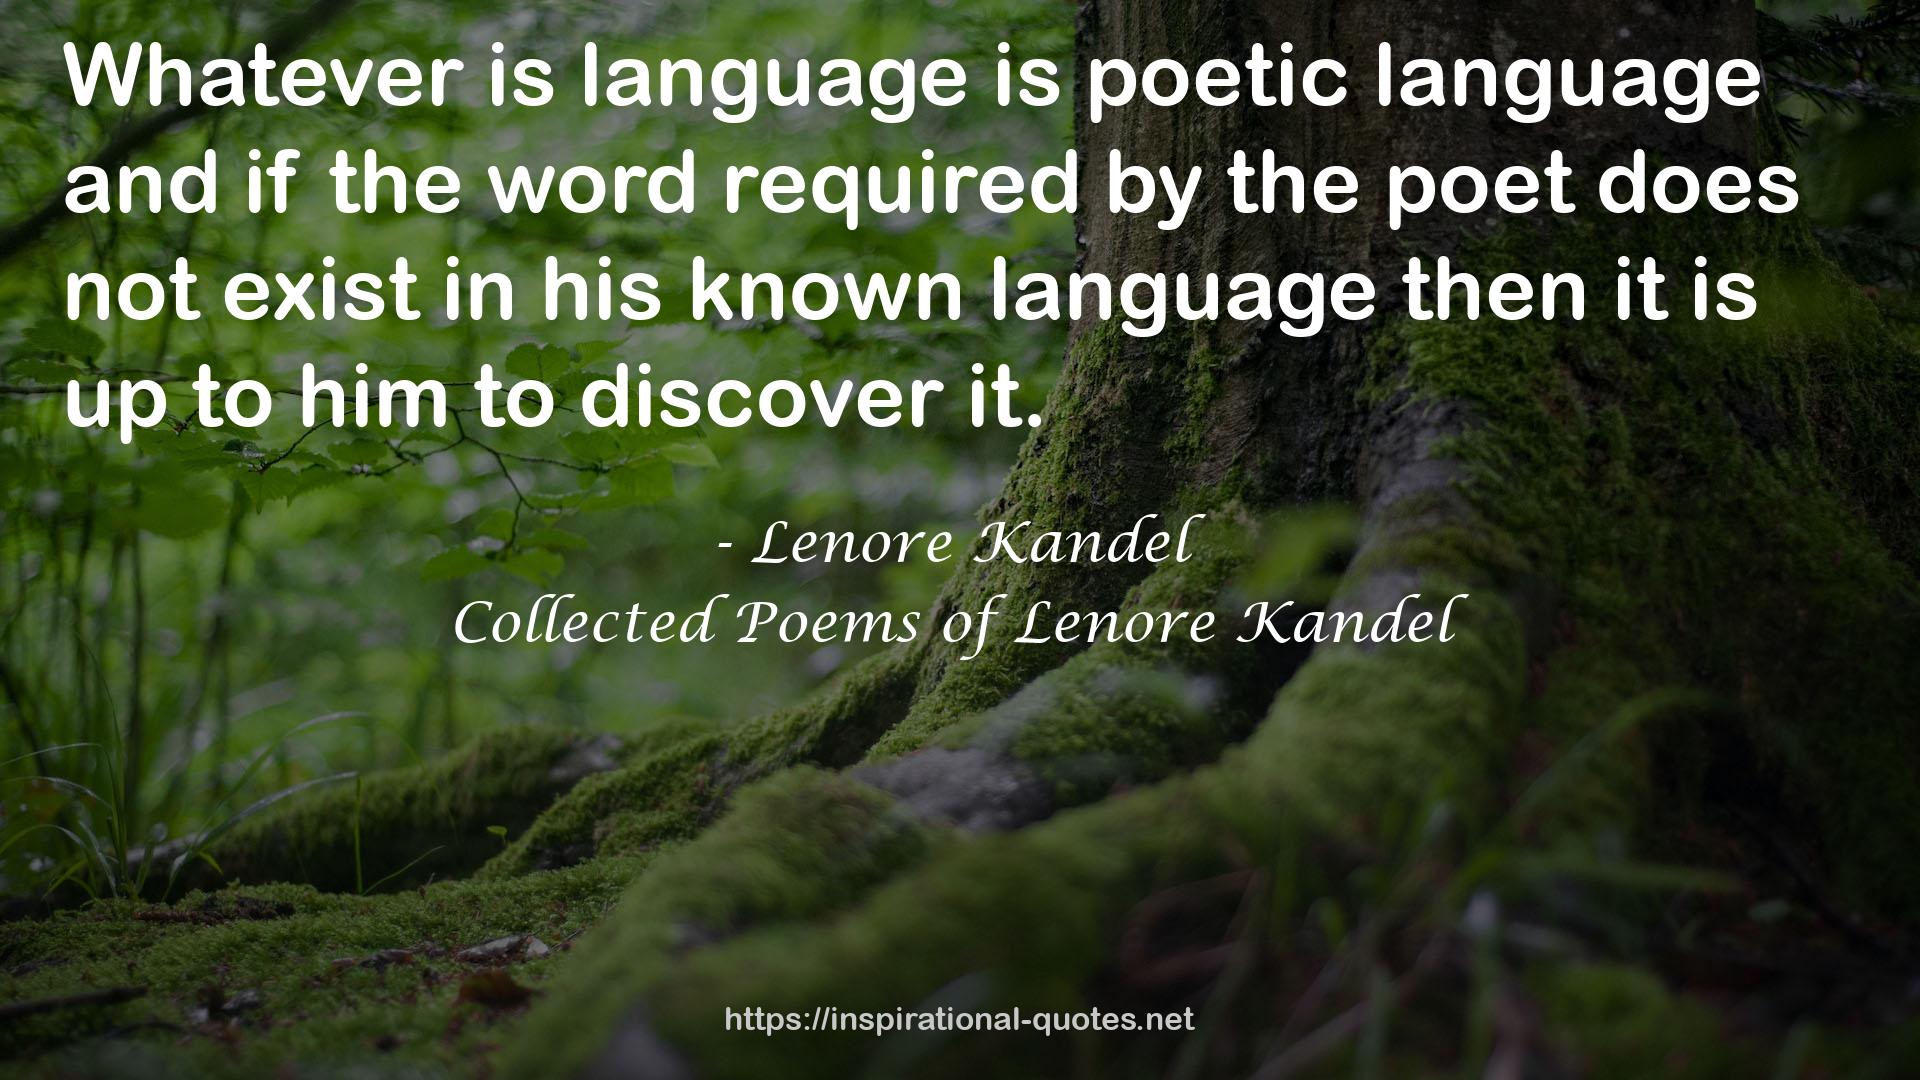 Lenore Kandel QUOTES